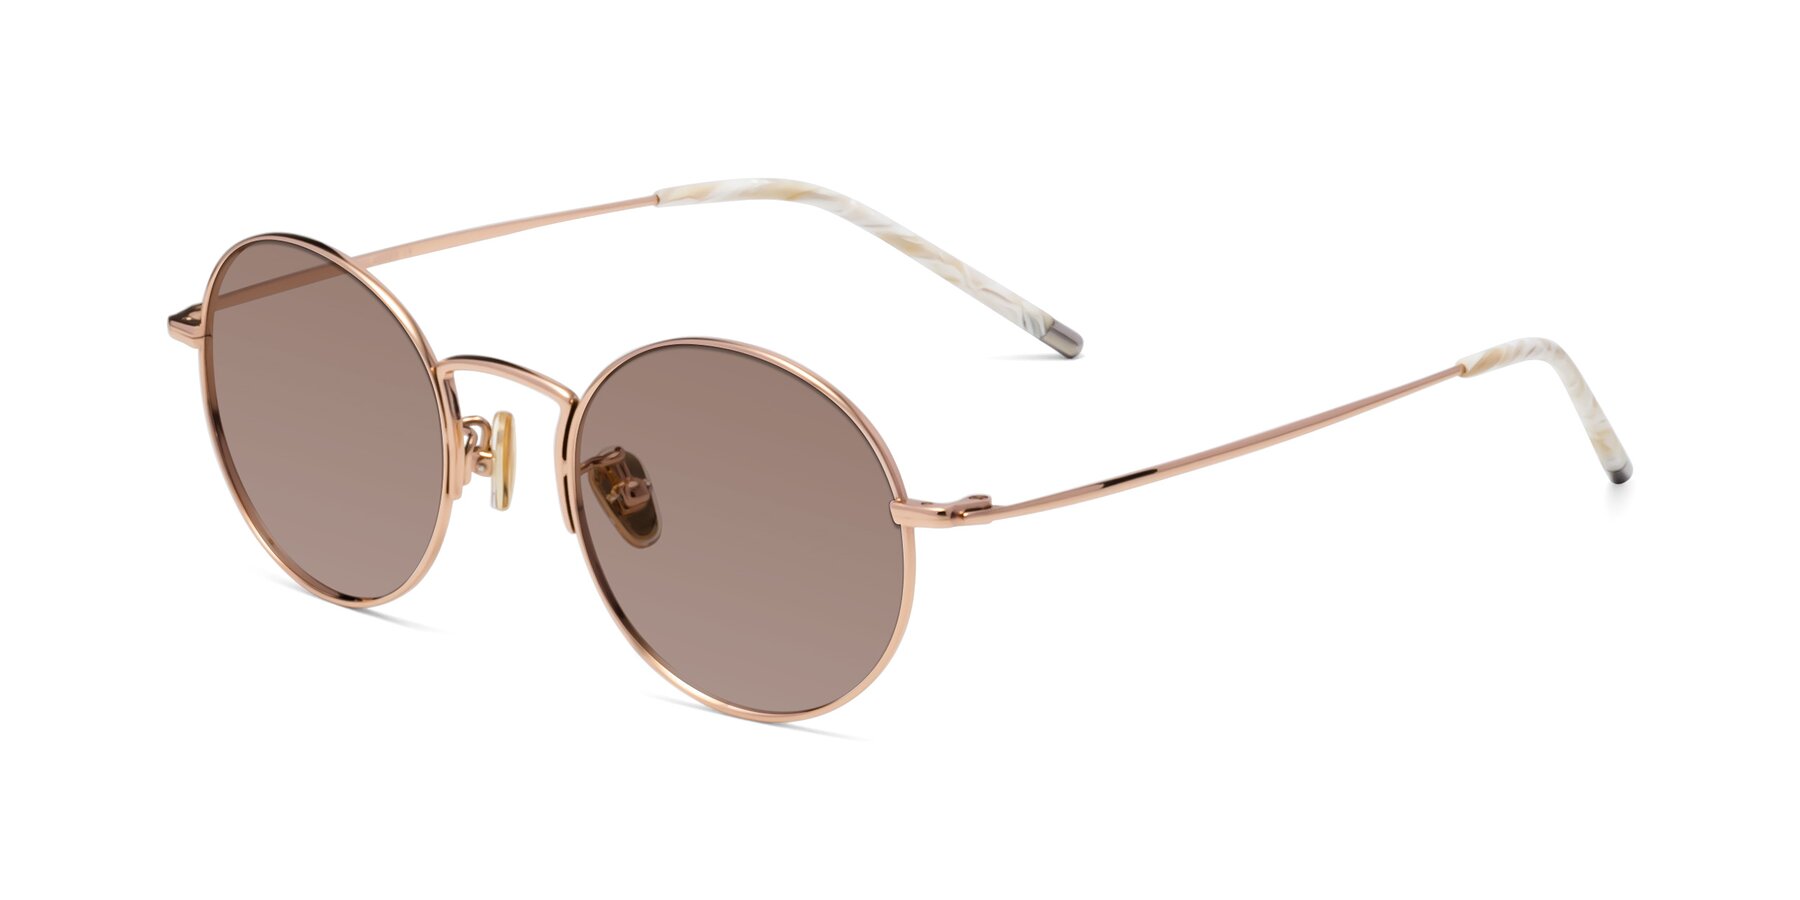 Angle of 80033 in Rose Gold with Medium Brown Tinted Lenses